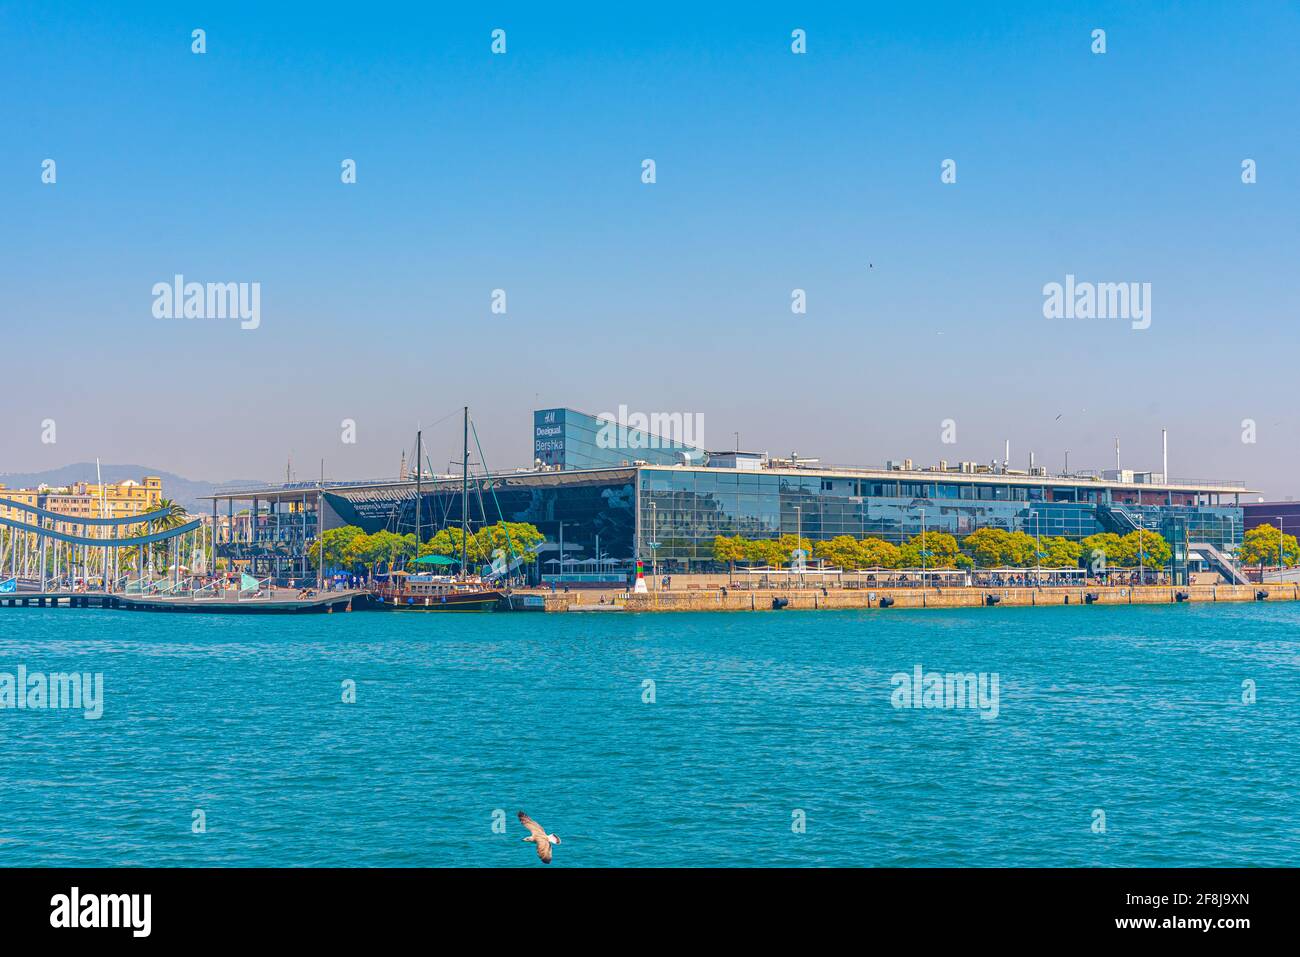 Page 9 - Promenade Shopping Mall High Resolution Stock Photography and  Images - Alamy